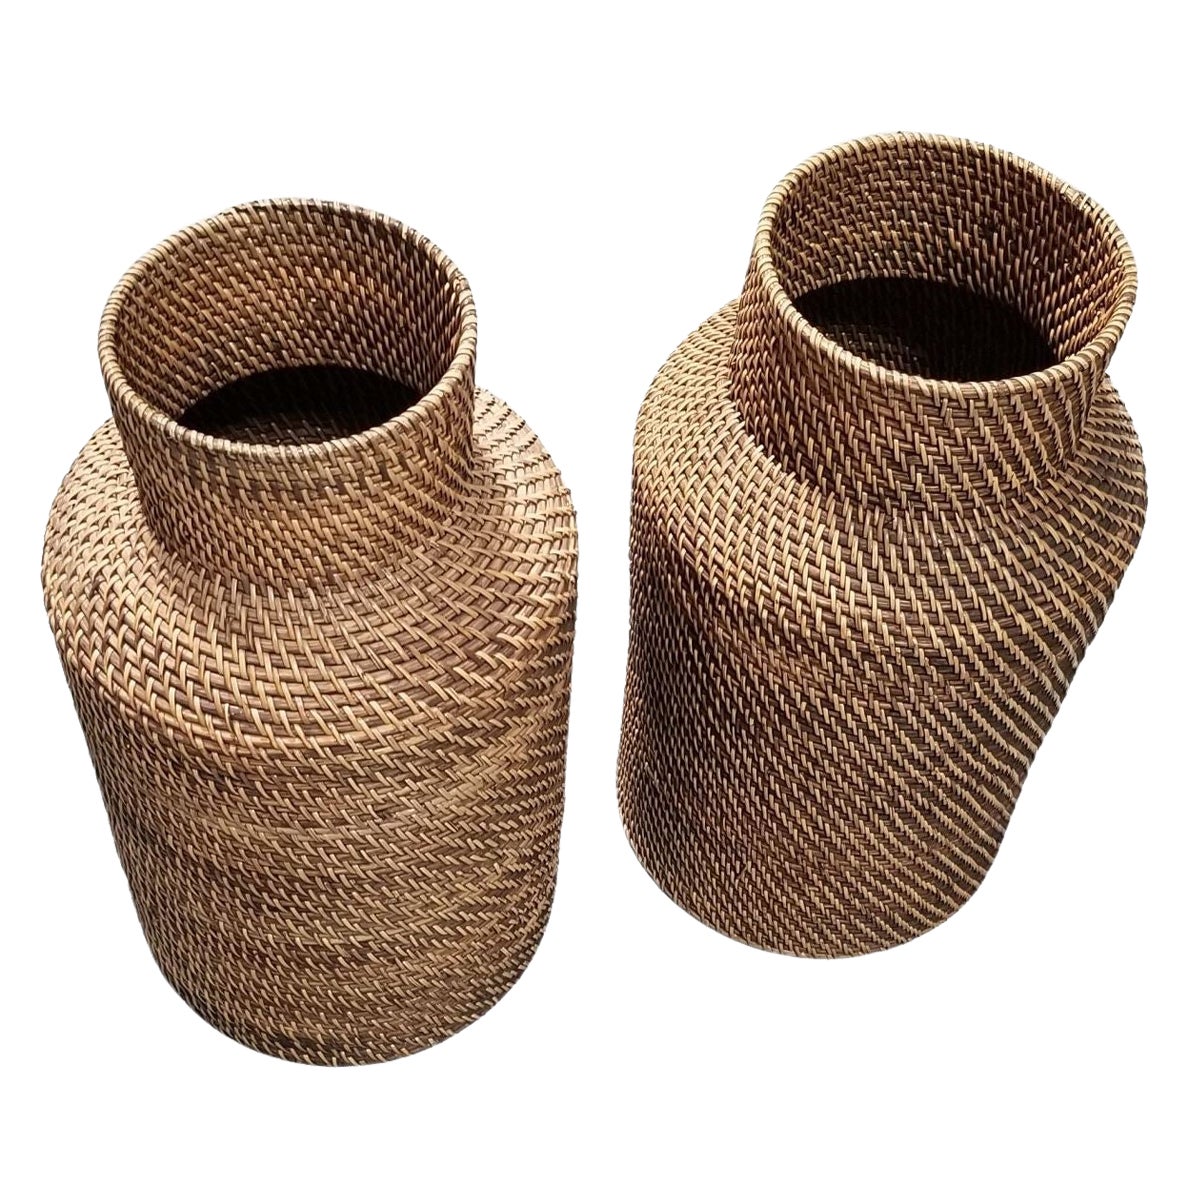 Restored Reed Rattan Wicker Decorative Vases Gabriella Crespi Styled - Pair of 2 For Sale